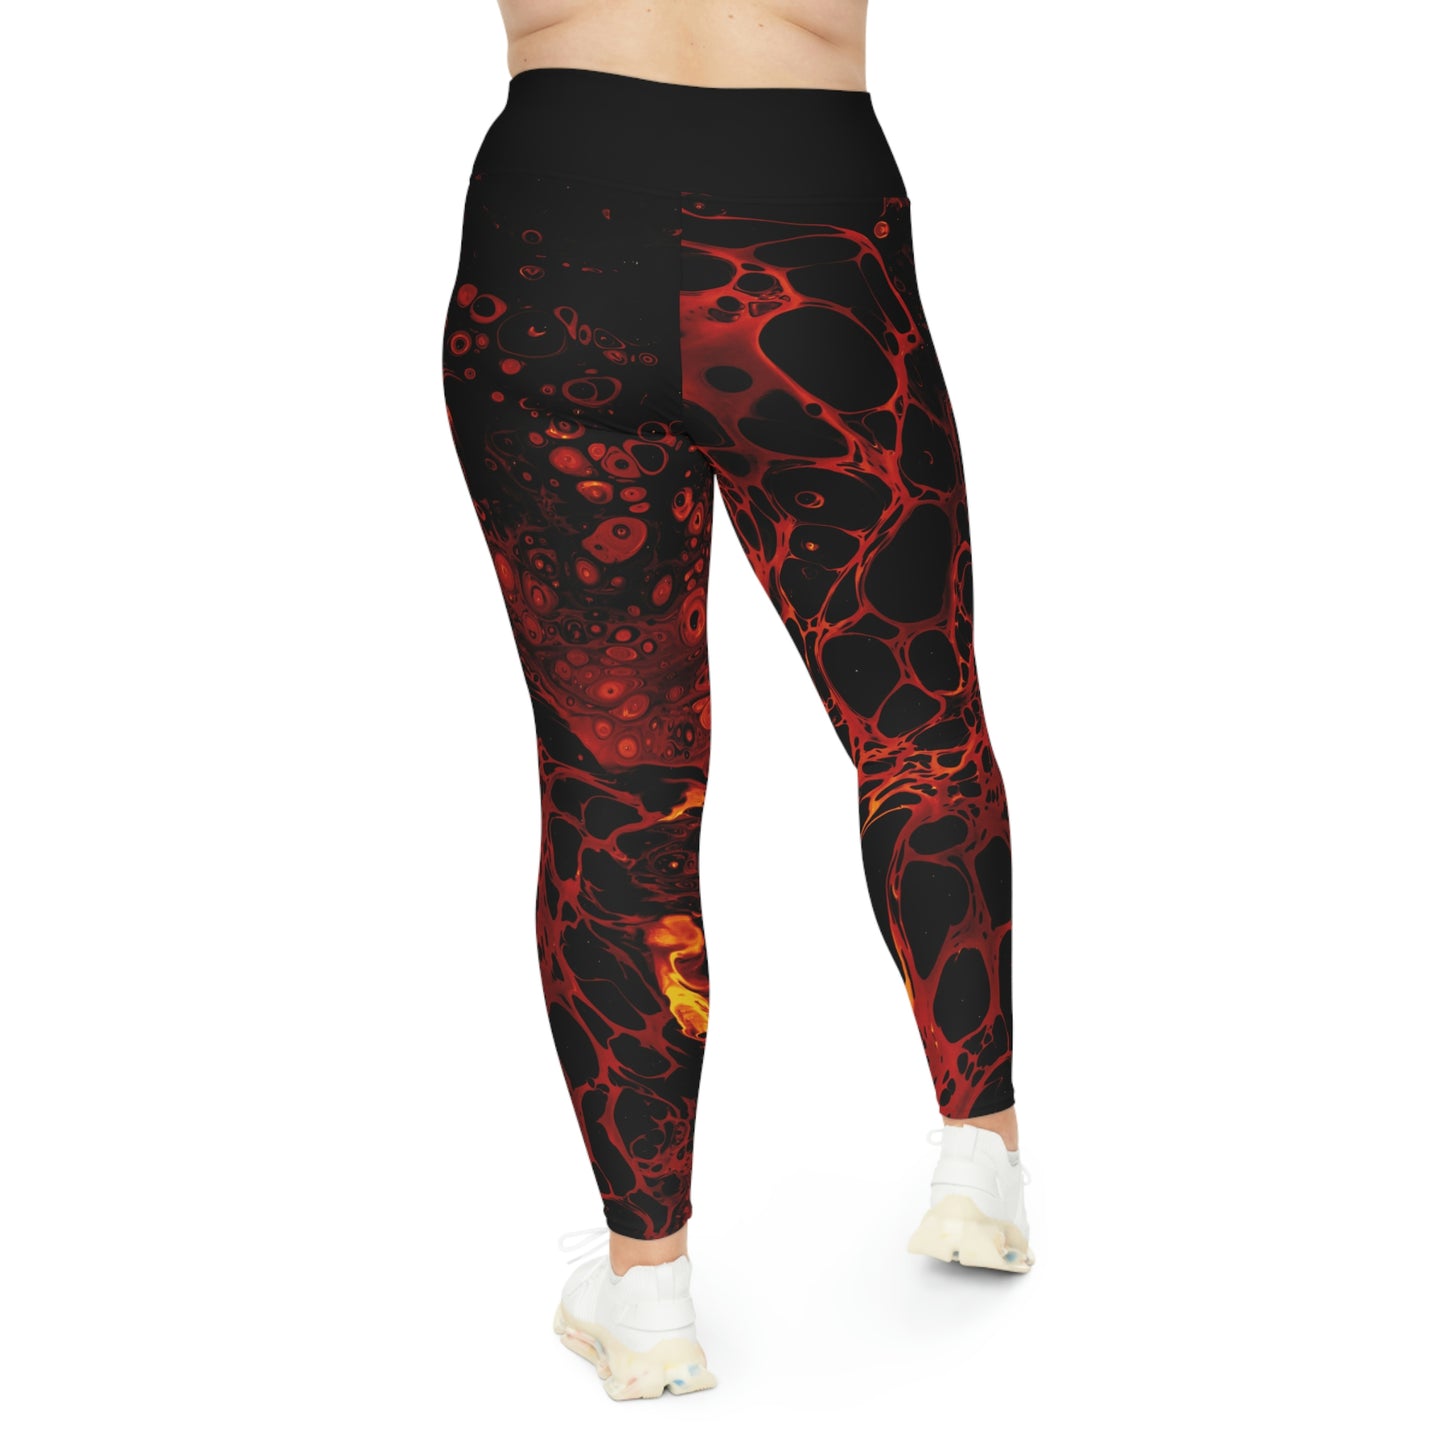 Lava Cute Summer Plus Size Leggings, One of a Kind Gift - Workout Activewear tights for Mothers Day, Girlfriend